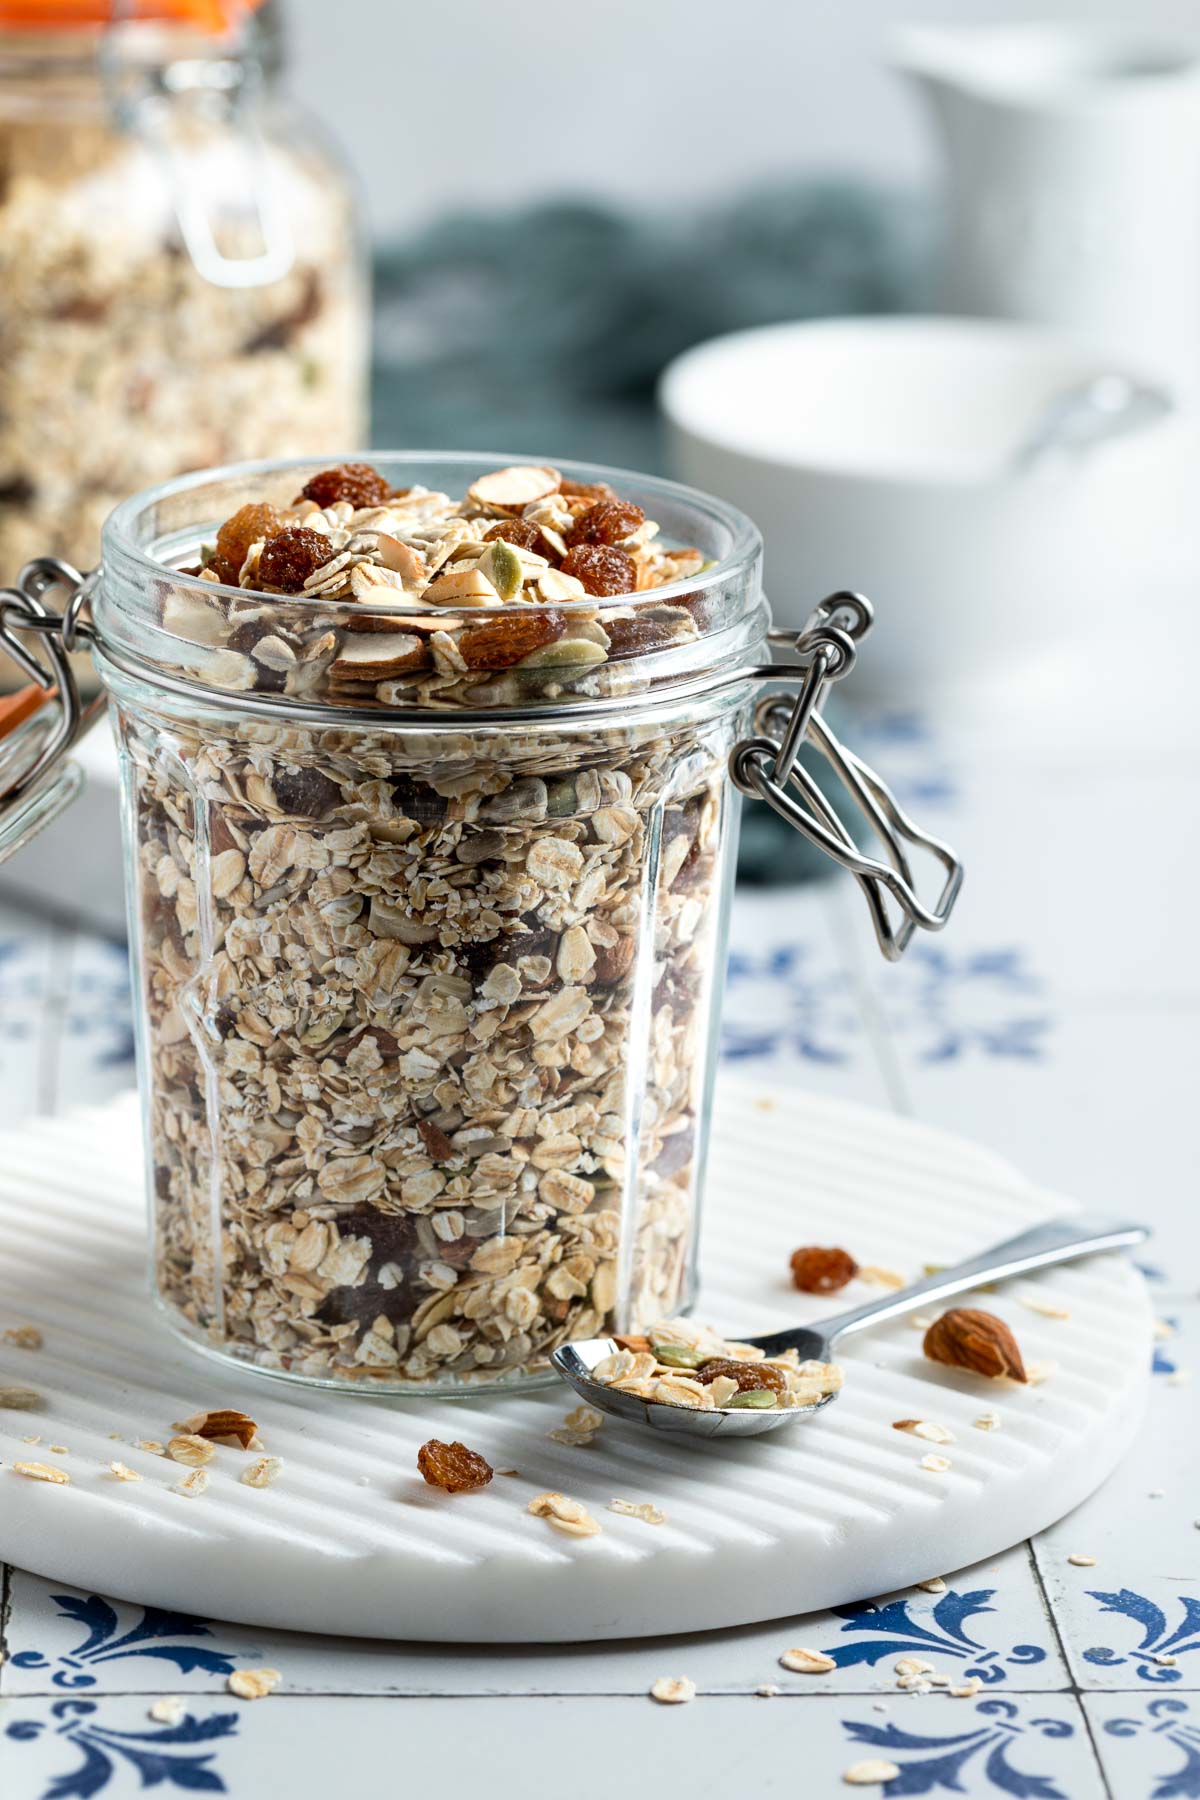 side view of muesli in a storage jar, cereal bowls and spoons just visible behind.